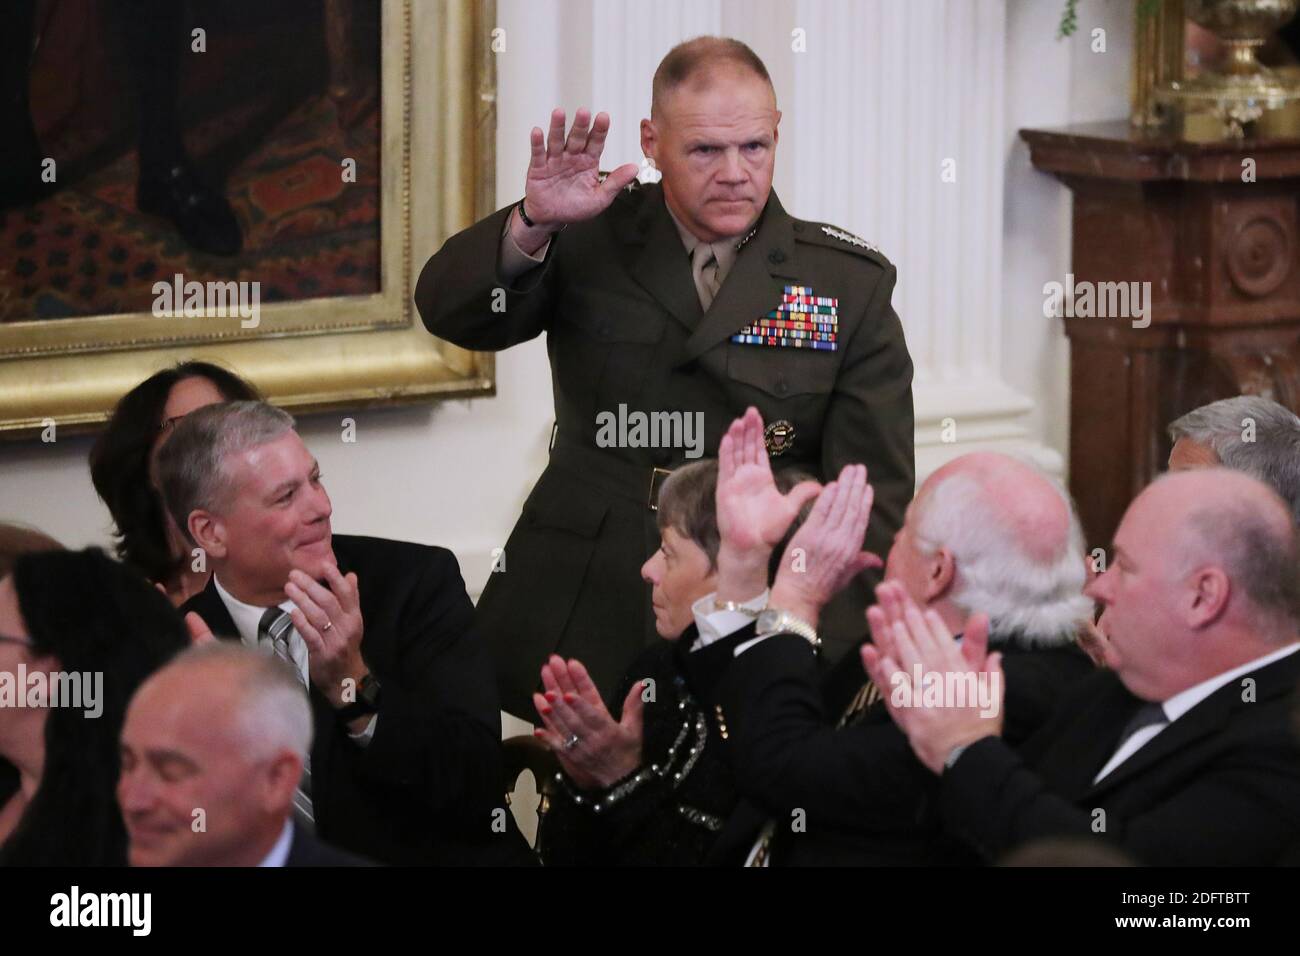 WASHINGTON, DC - OCTOBER 25: (AFP OUT) Commandant of the Marine Corps Gen. Robert Neller is recognized during an event commemorating the 35th anniversary of attack on the Beirut Barracks in the East Room of the White House October 25, 2018 in Washington, DC. On October 23, 1983 two truck bombs struck the buildings housing Multinational Force in Lebanon (MNF) peacekeepers, killing 241 U.S. and 58 French peacekeepers and 6 civilians. Photo by Chip Somodevilla/ABACAPRESS.COM Stock Photo